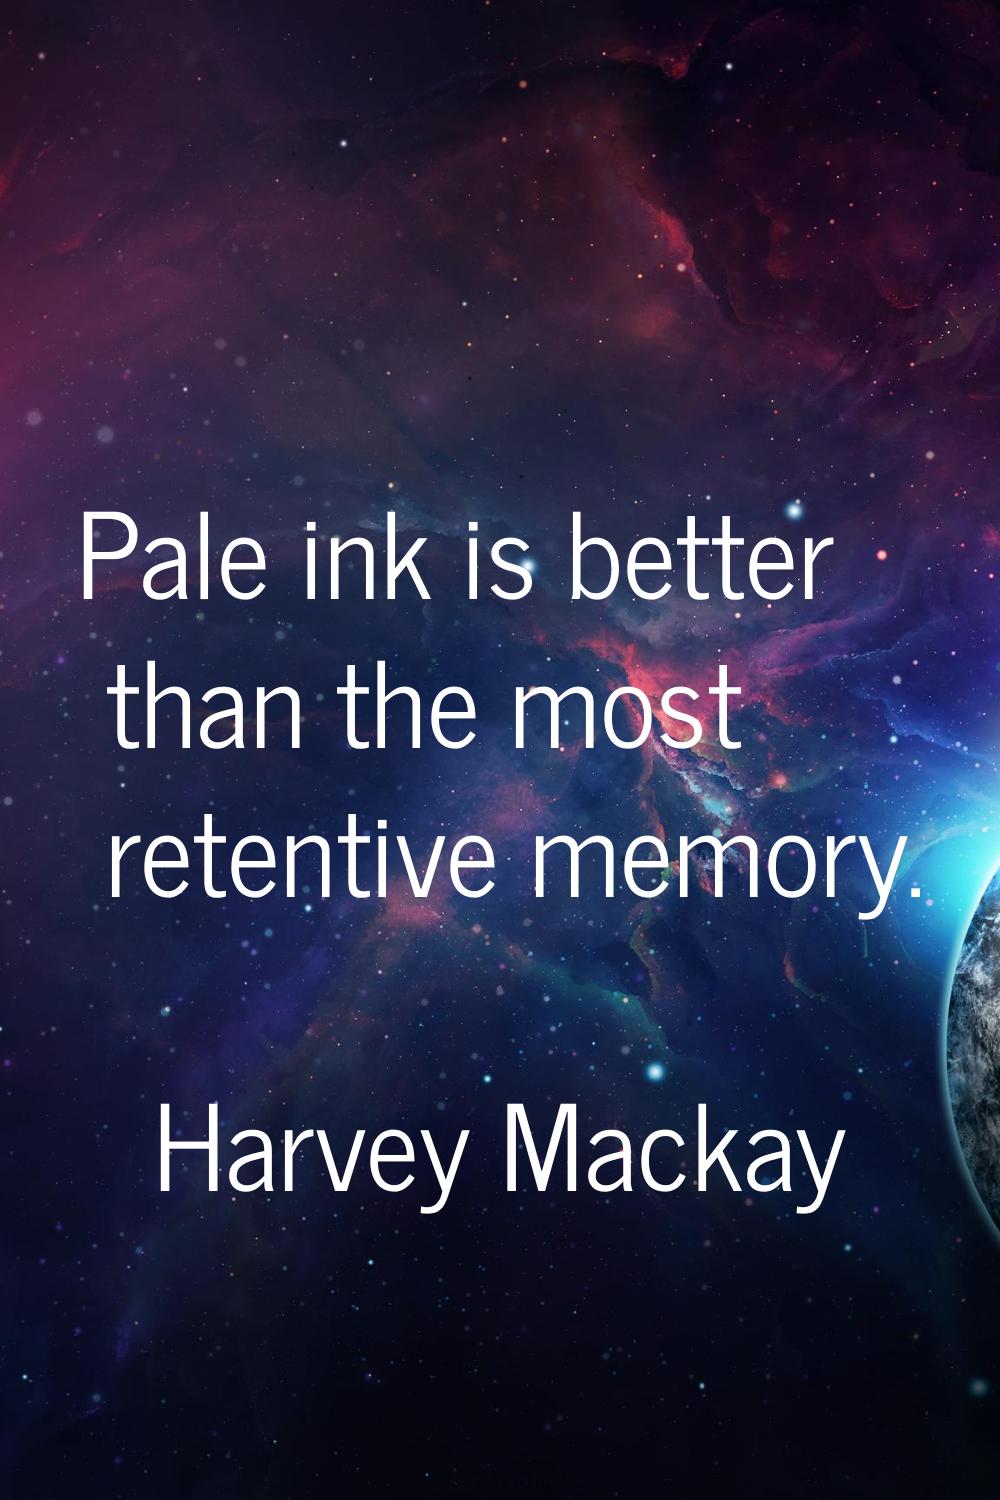 Pale ink is better than the most retentive memory.